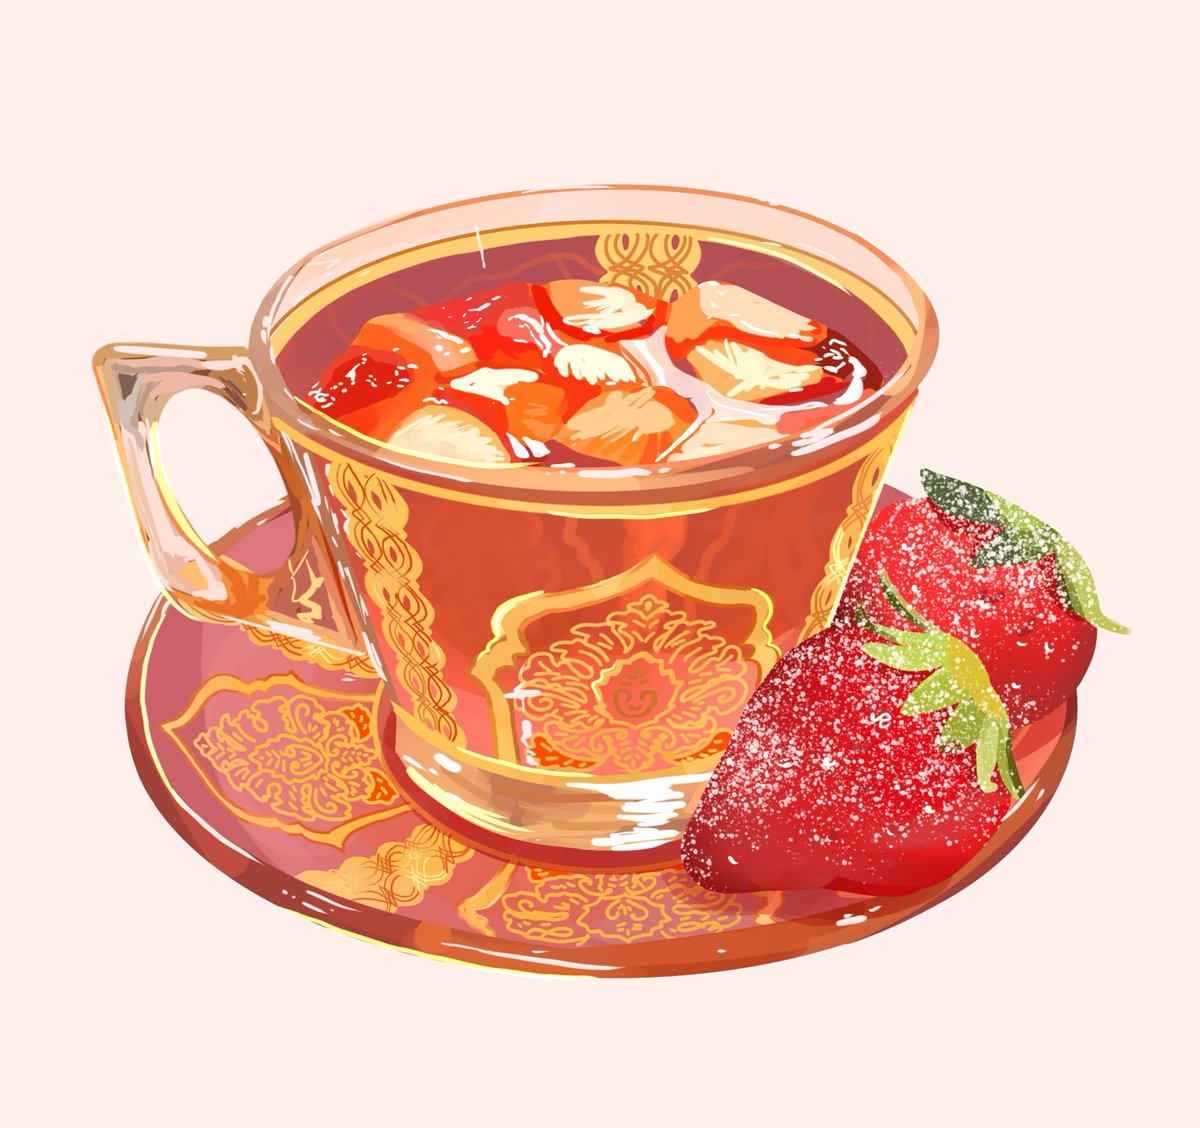 「probably these iconic teacup studies!   」|꒰ rain ꒱のイラスト